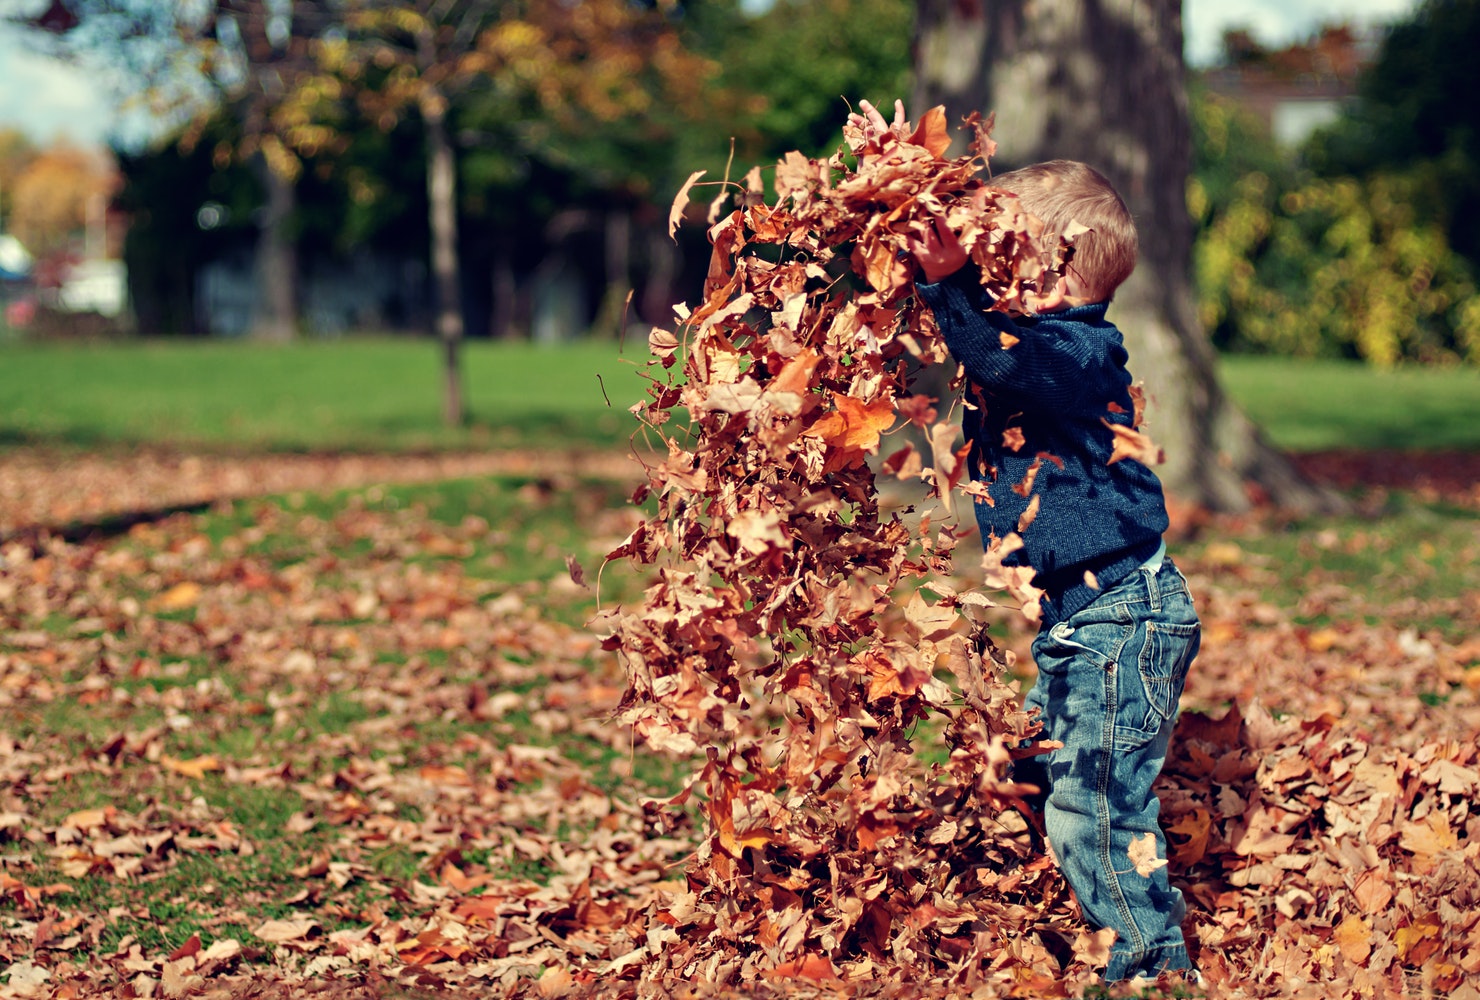 A child playing in leaves